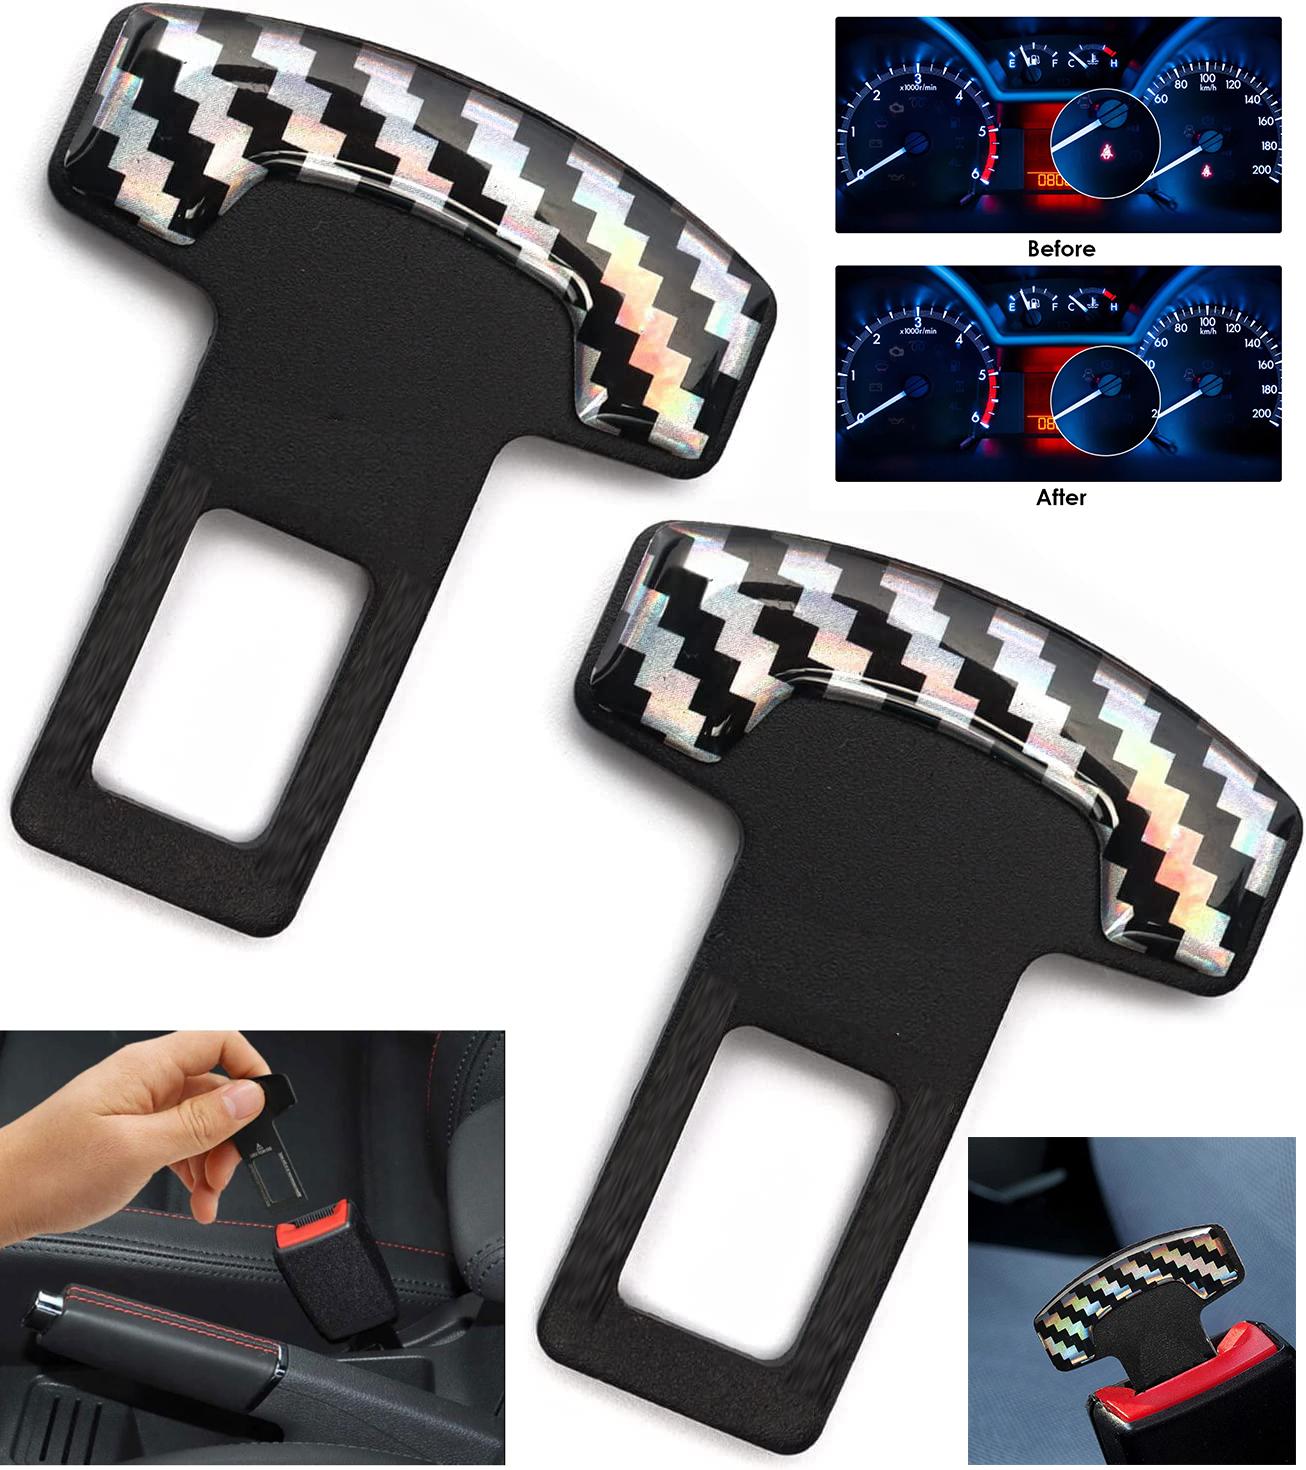 2 PCs Universal Vehicle Safety Car Seat Belt Alarm Stopper Alloy Buckle   Carbon Fibre Replacement Kit: Beep LED Silencer Null Insert Clip Part  useful for All Cars Daily Purpose –